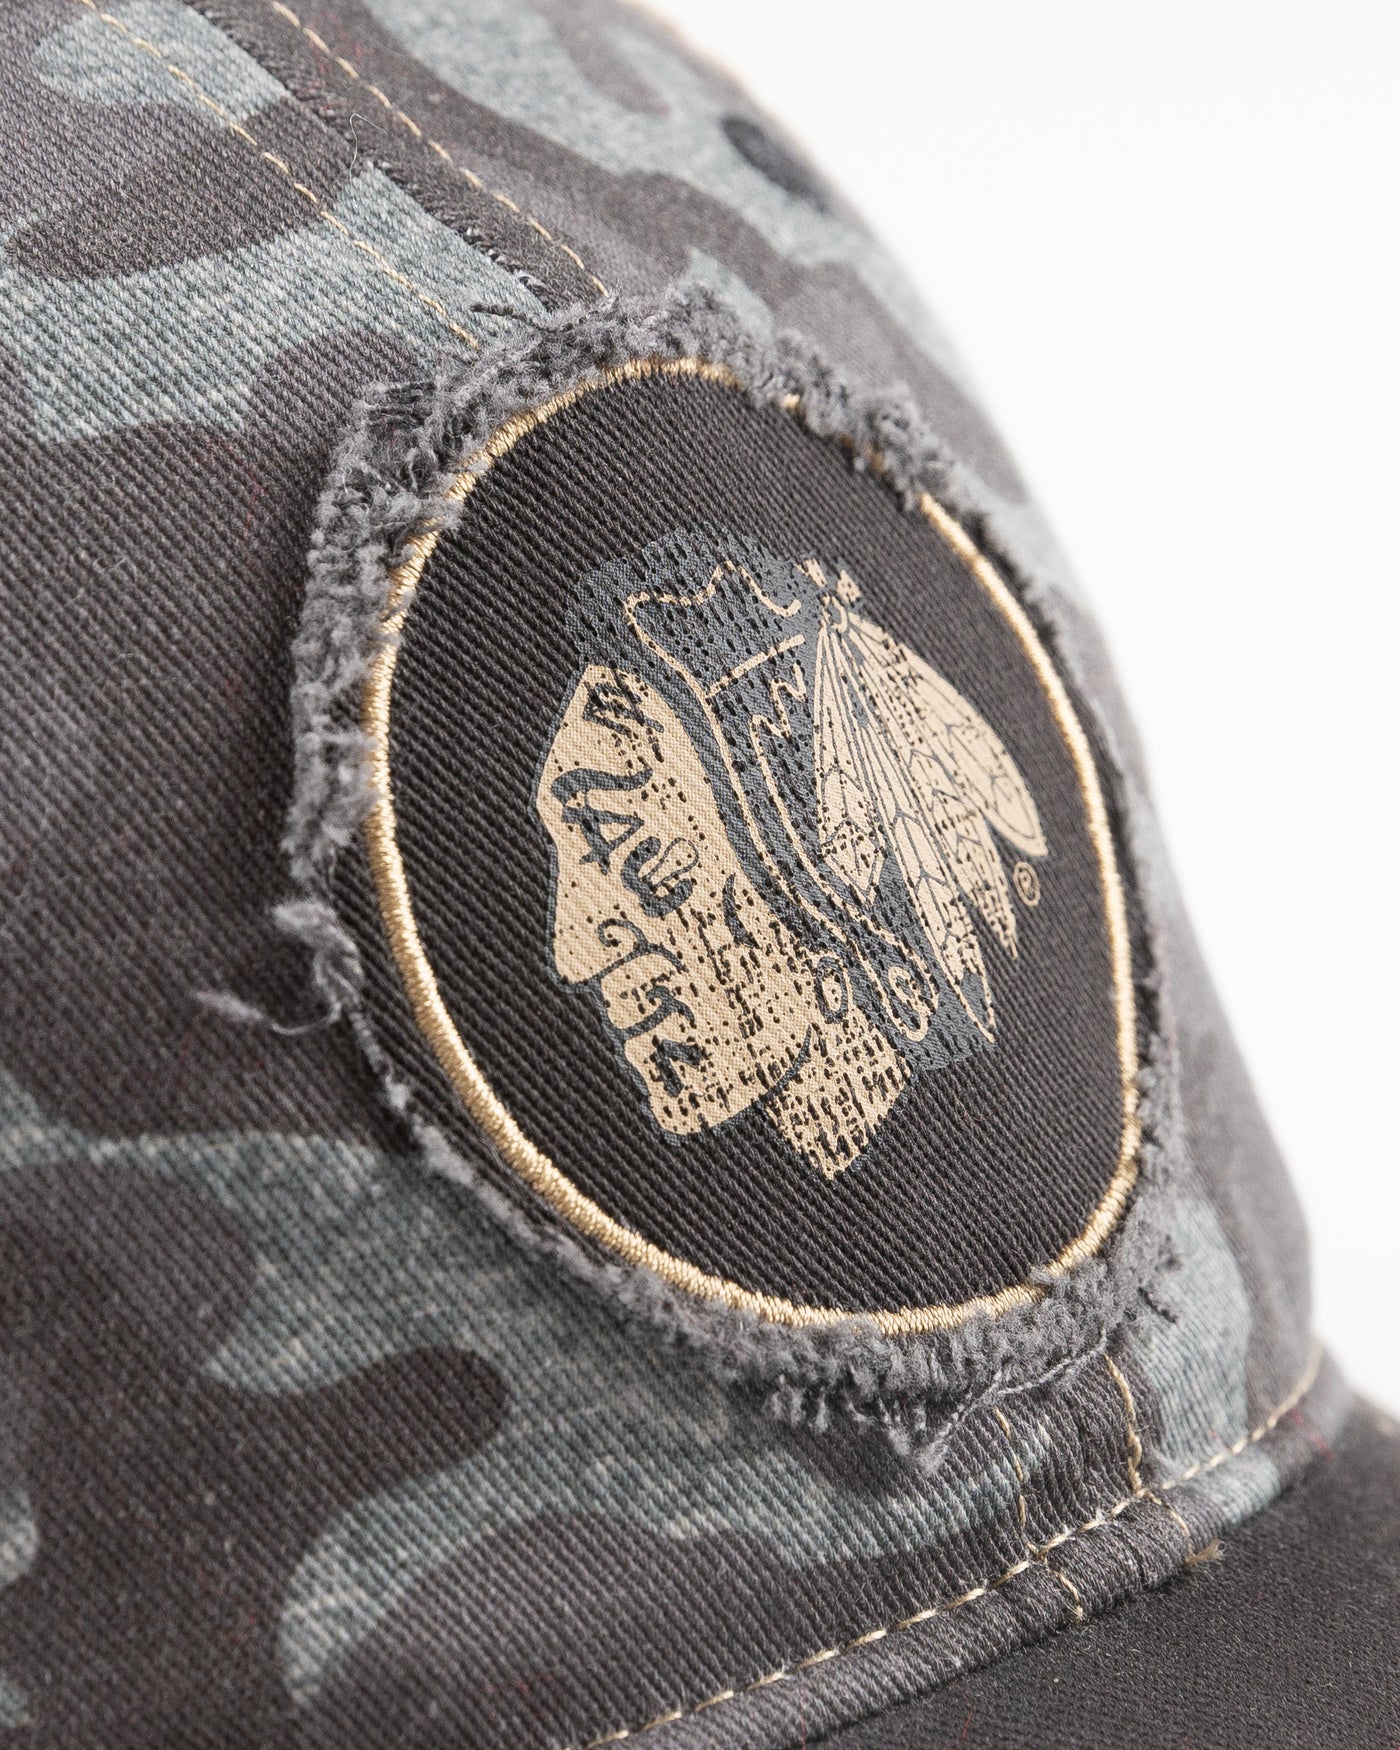 grey Colosseum operation hat trick trucker cap with Chicago Blackhawks branding - detail lay flat